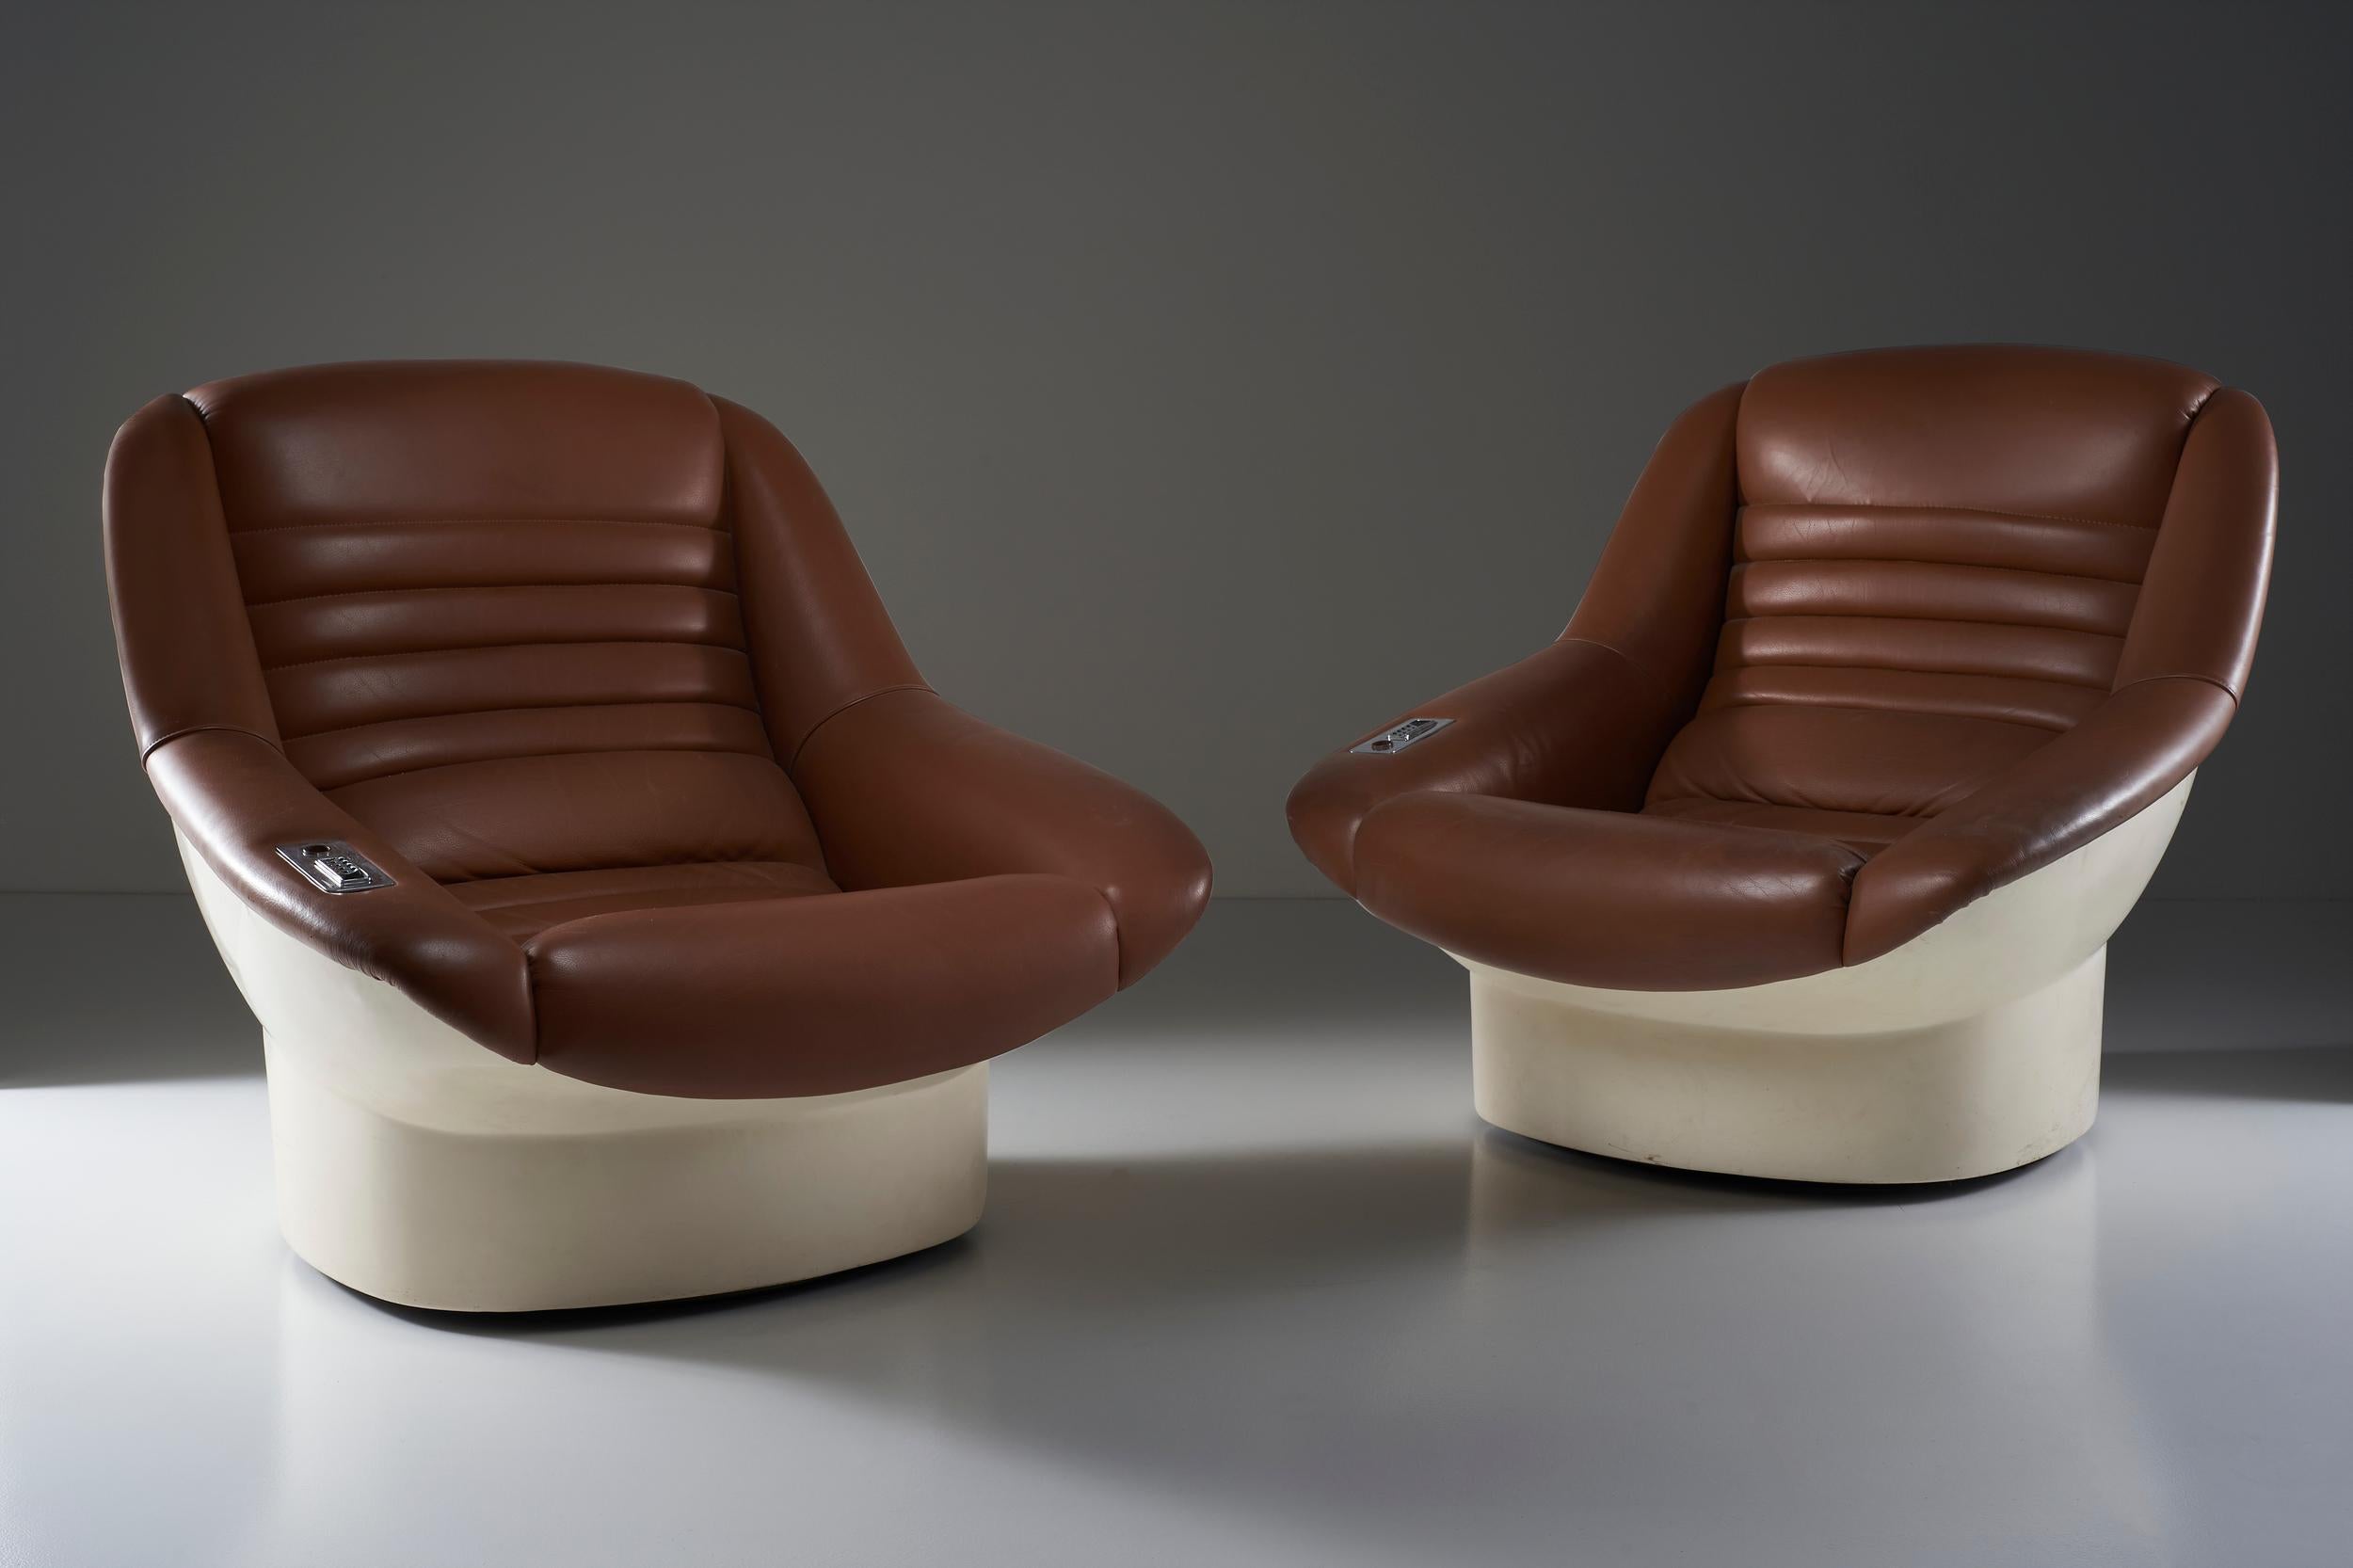 This pair of Alda chairs designed by Cesare Casati and Enzo Hybsch are made up of a fiberglass shell that swivels on its base while the seat features leather upholstery.

Prod. Comfort, Italia, 1966
Bibliography G. Gramigna, Repertorio 1950-1980,